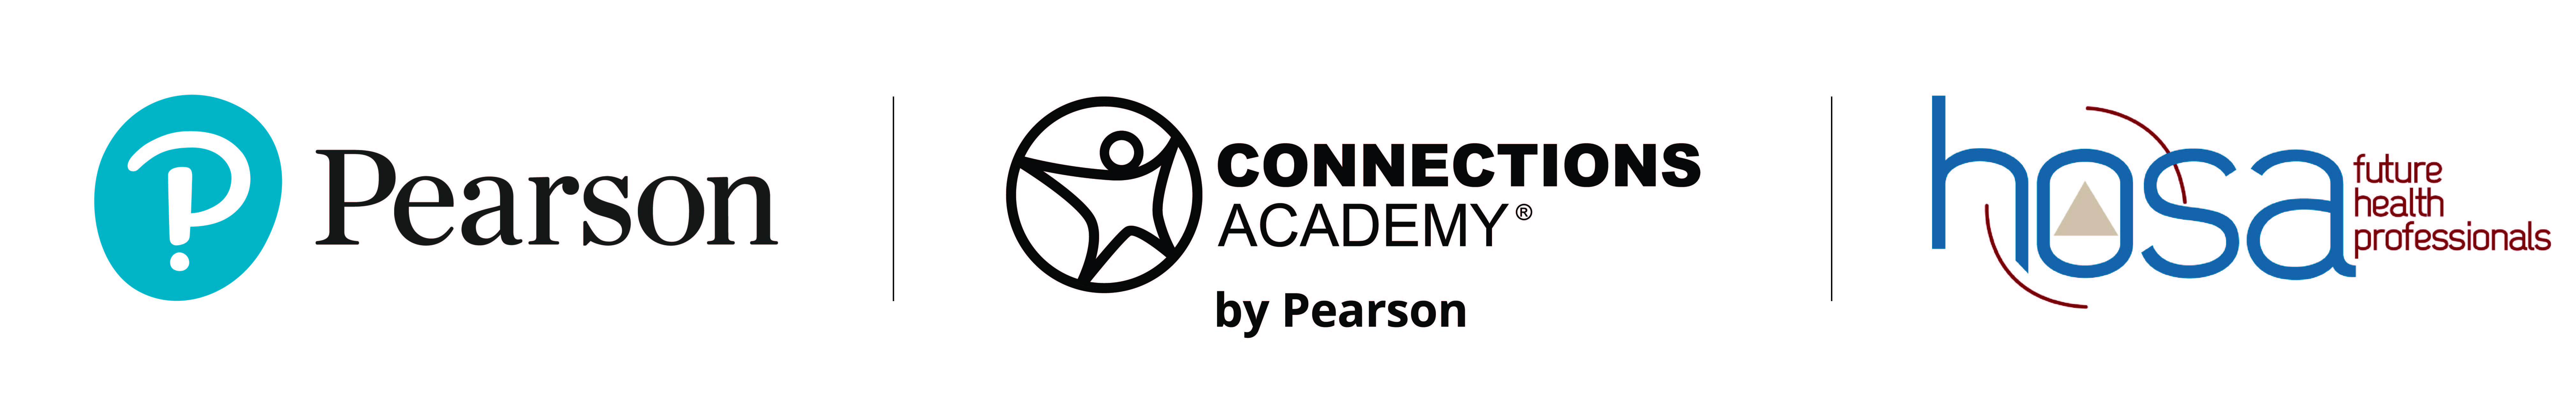 Pearson, Connections Academy, and HOSA logos